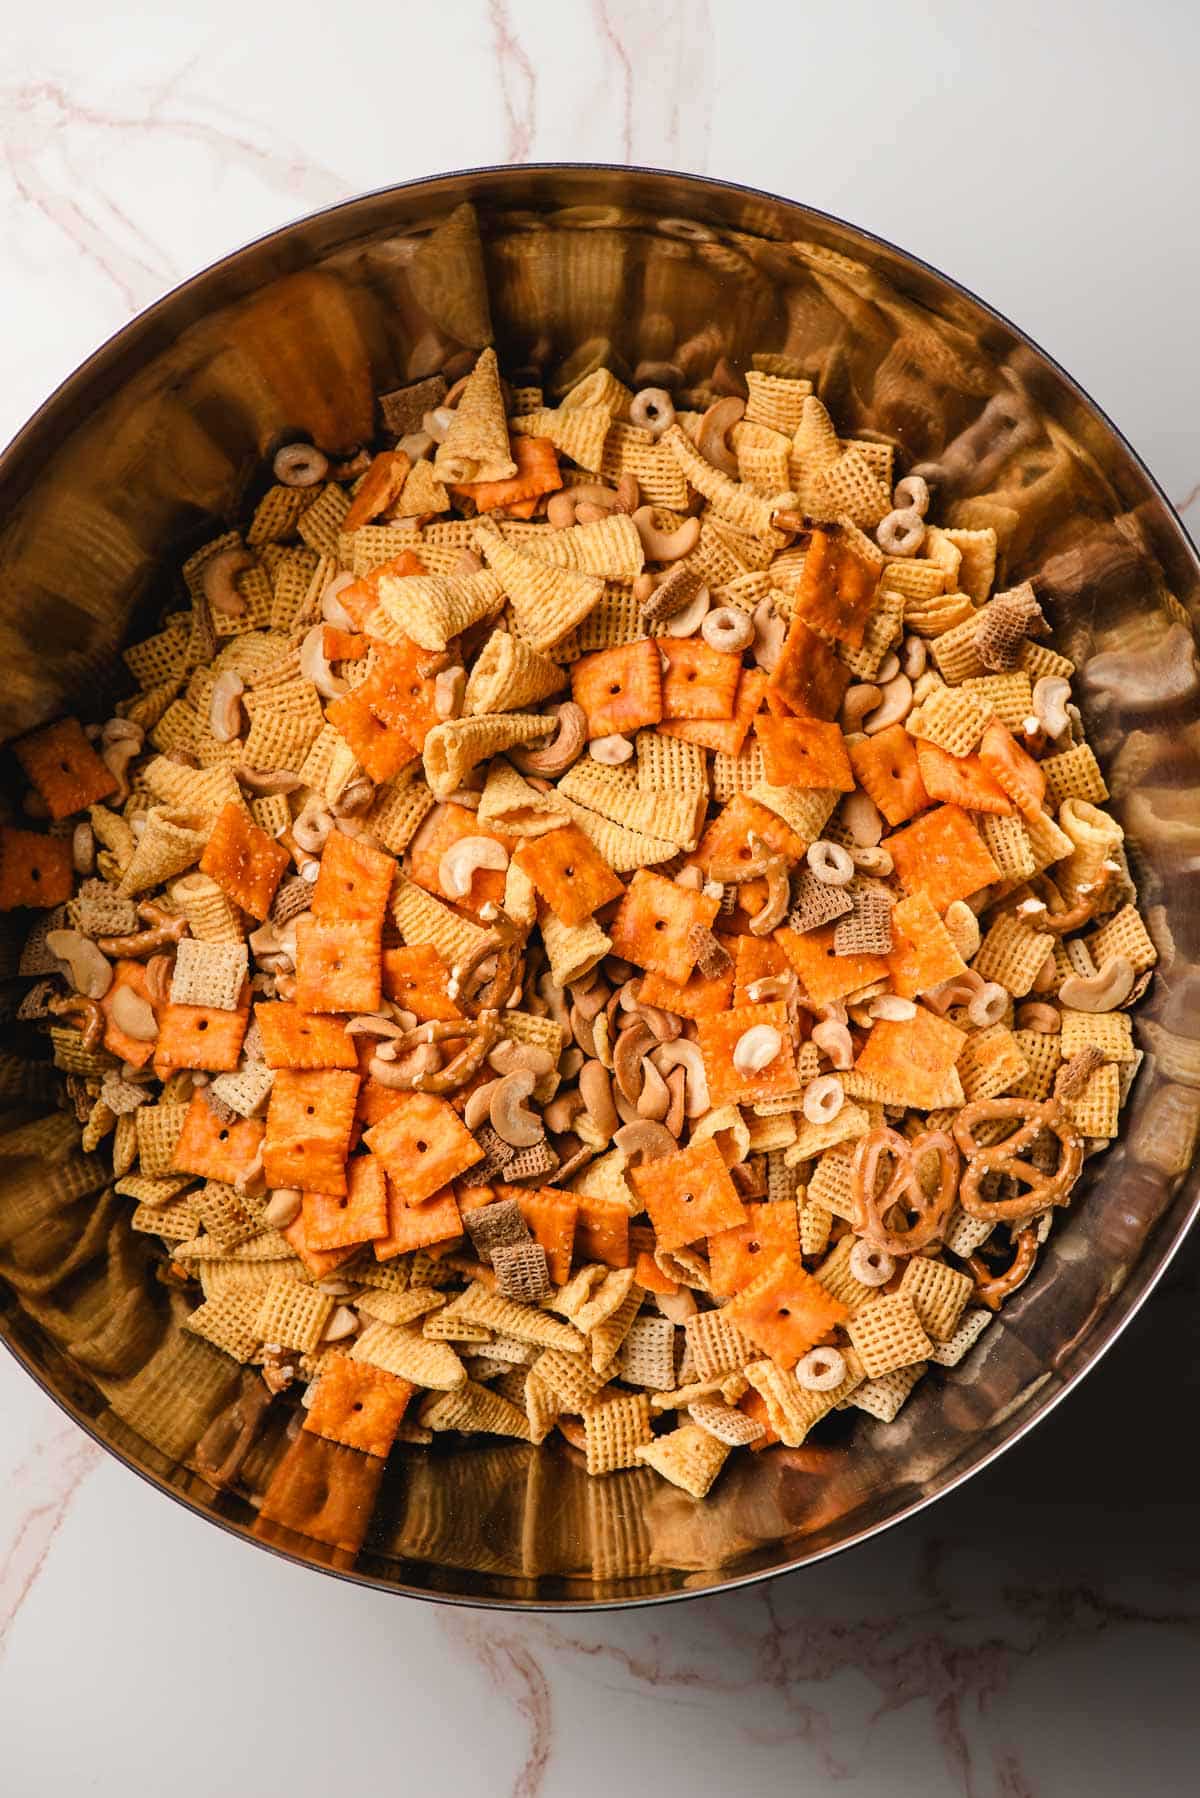 A large mixing bowl full of various snacks for making ranch chex mix.